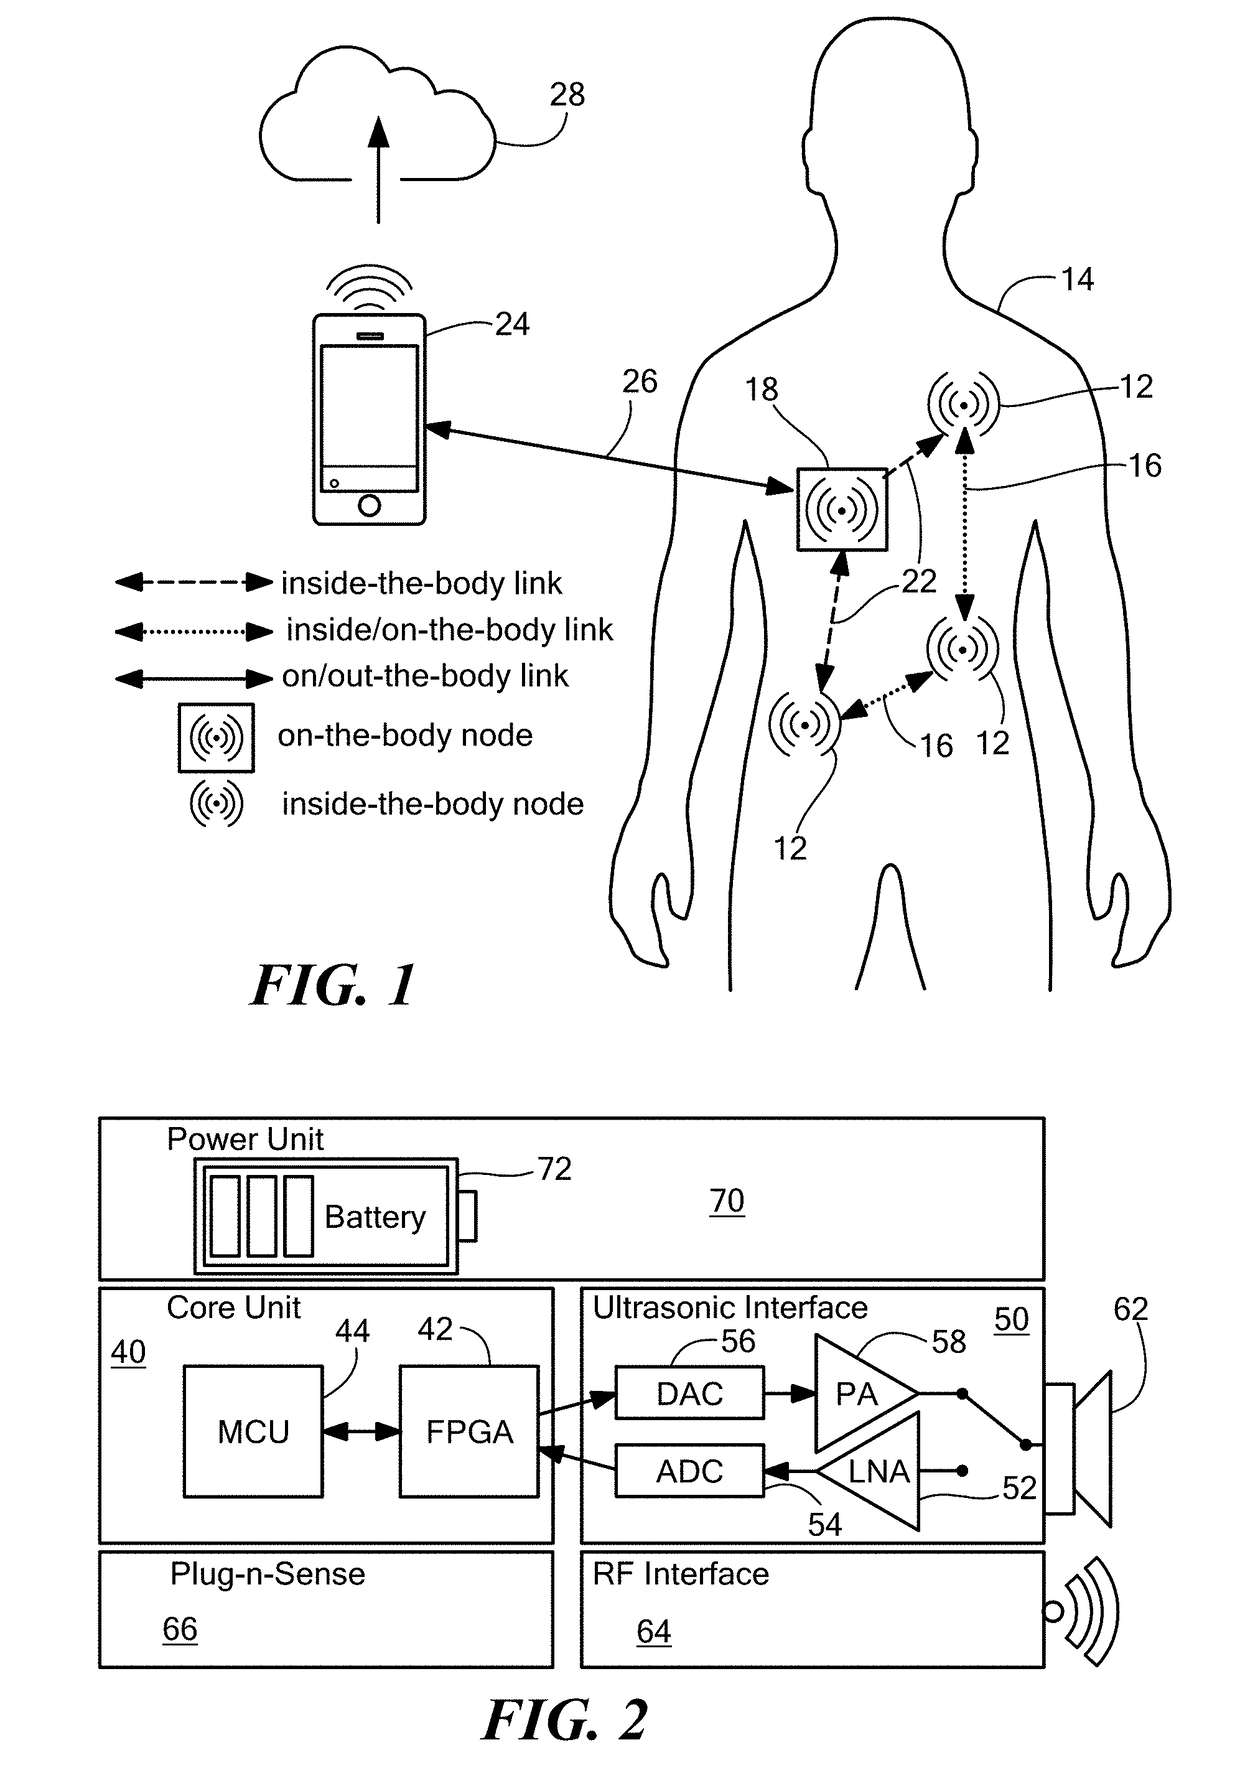 Software-Defined Implantable Ultrasonic Device for Use in the Internet of Medical Things